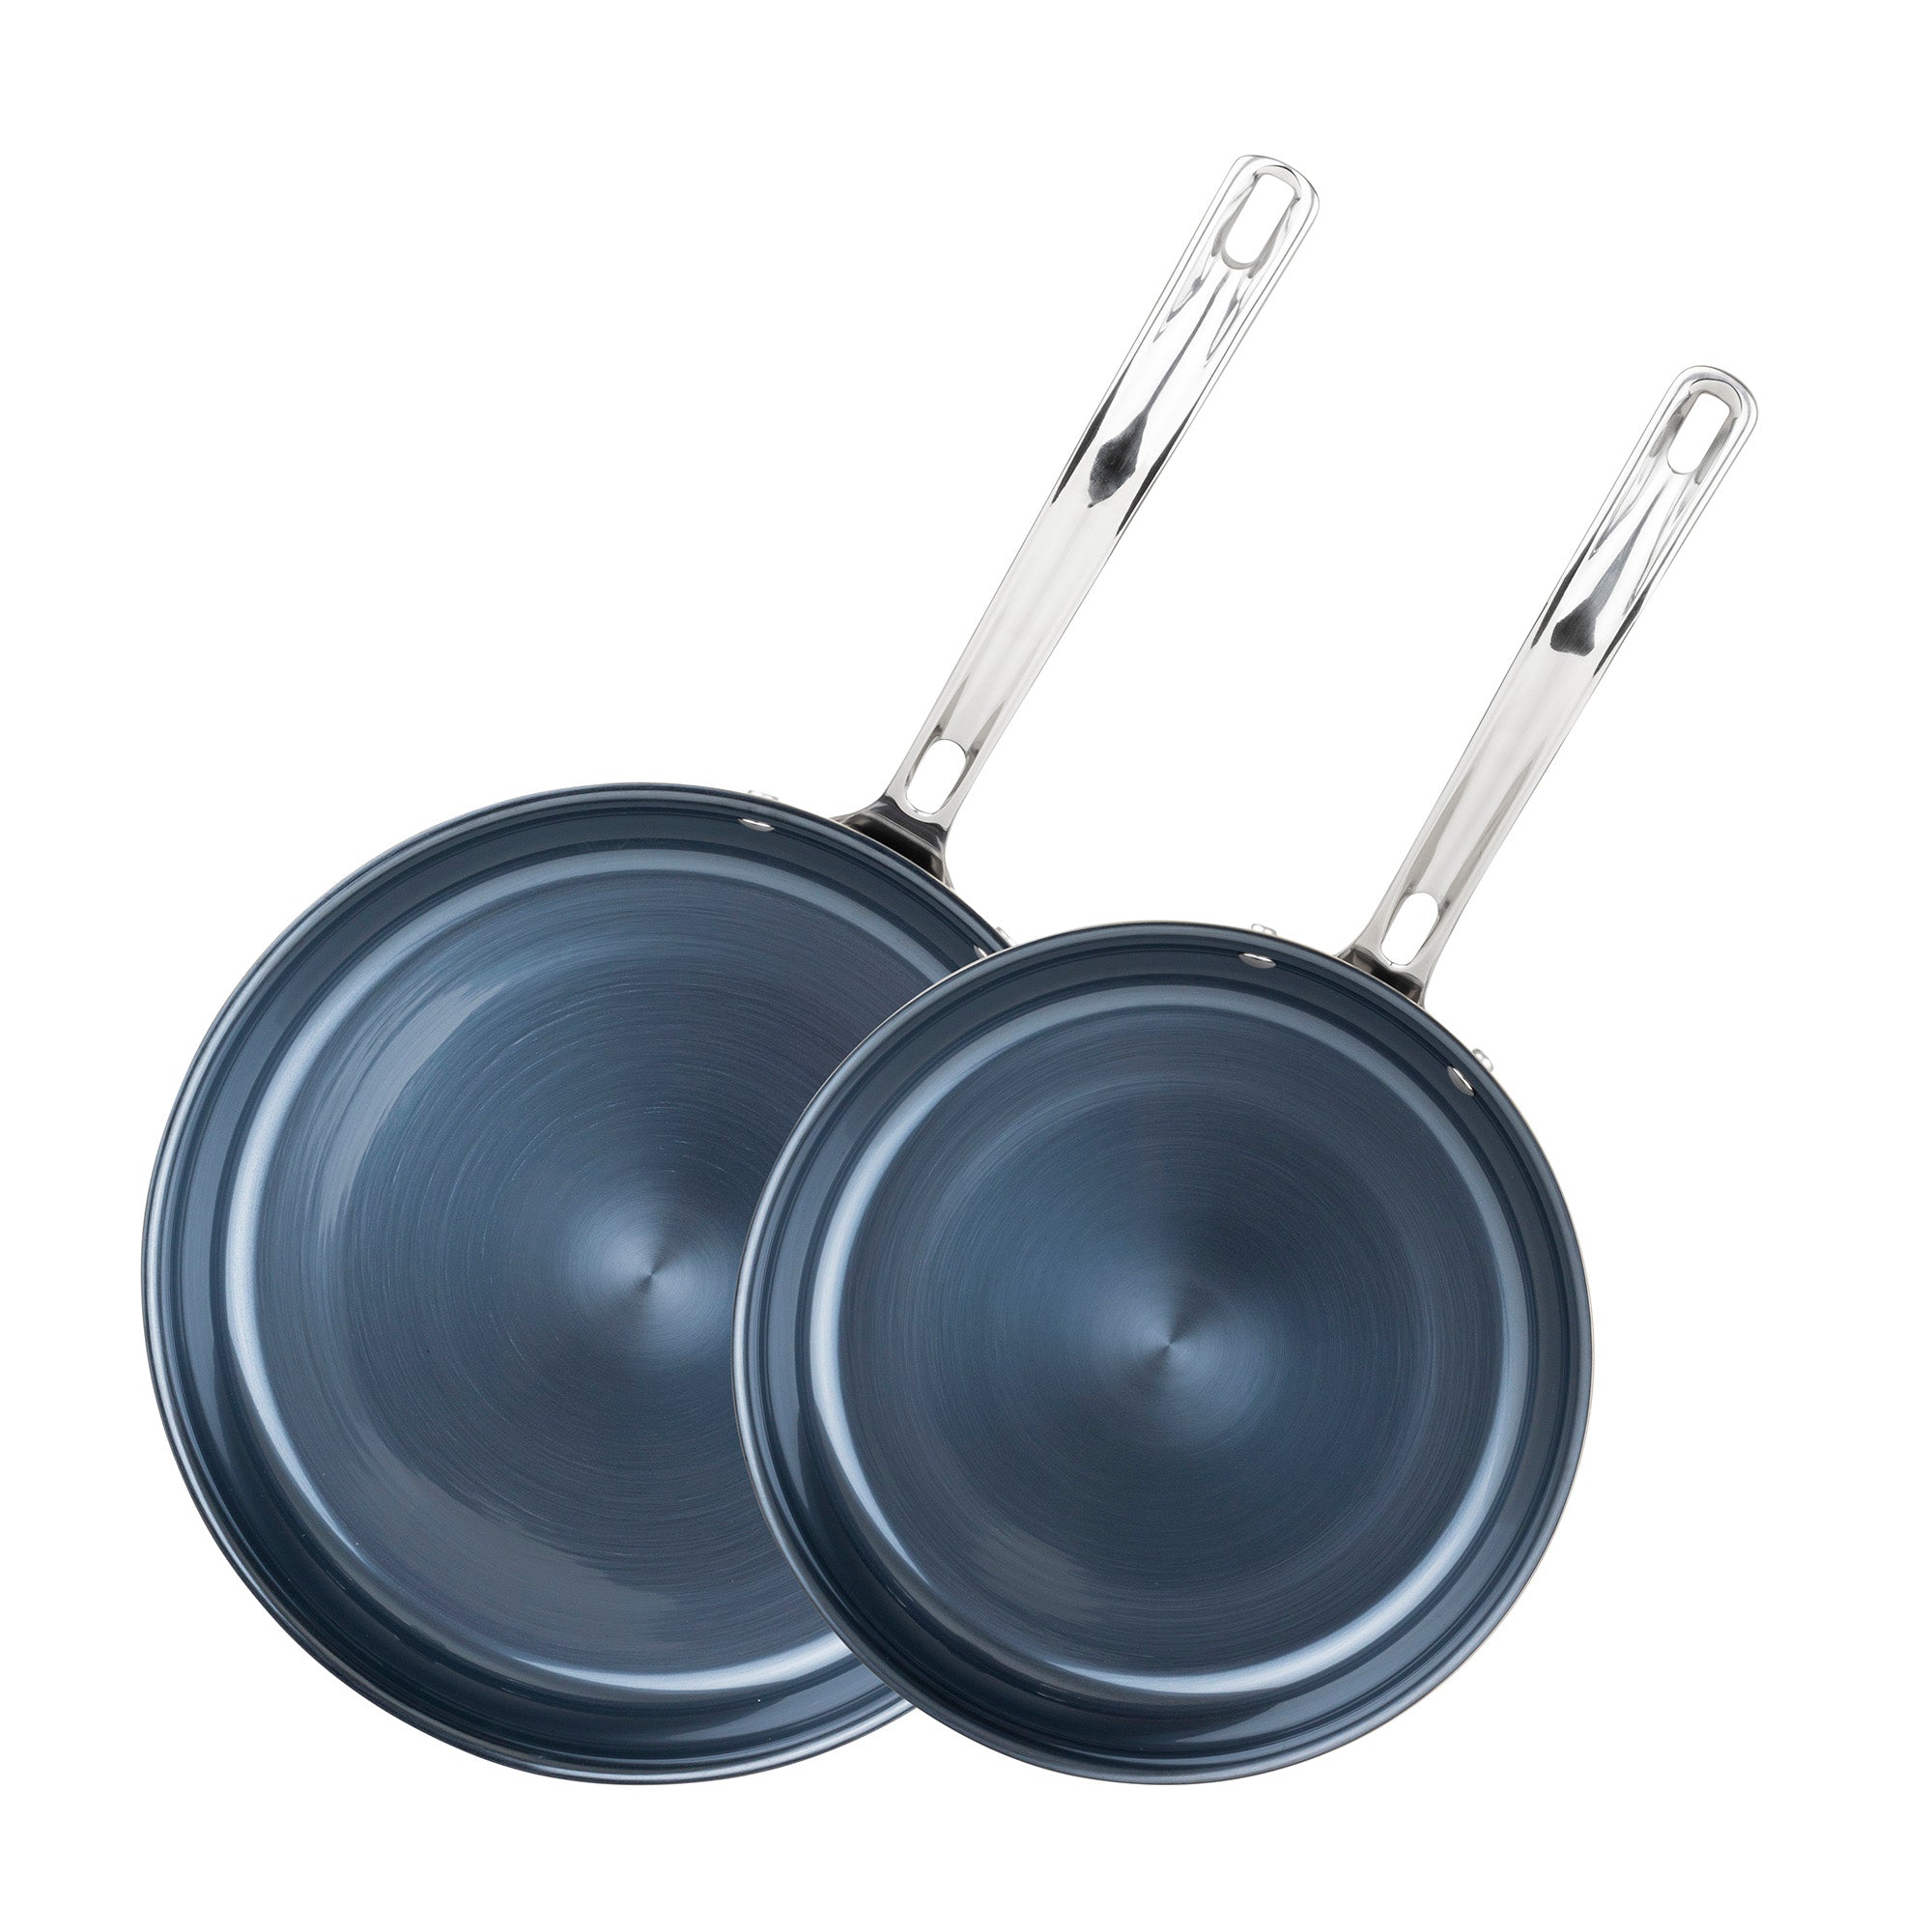 Titanium frying pan Nonstick Fry Pan Induction Compatible Multipurpose  Cookware Use for Home Kitchen or Restaurant